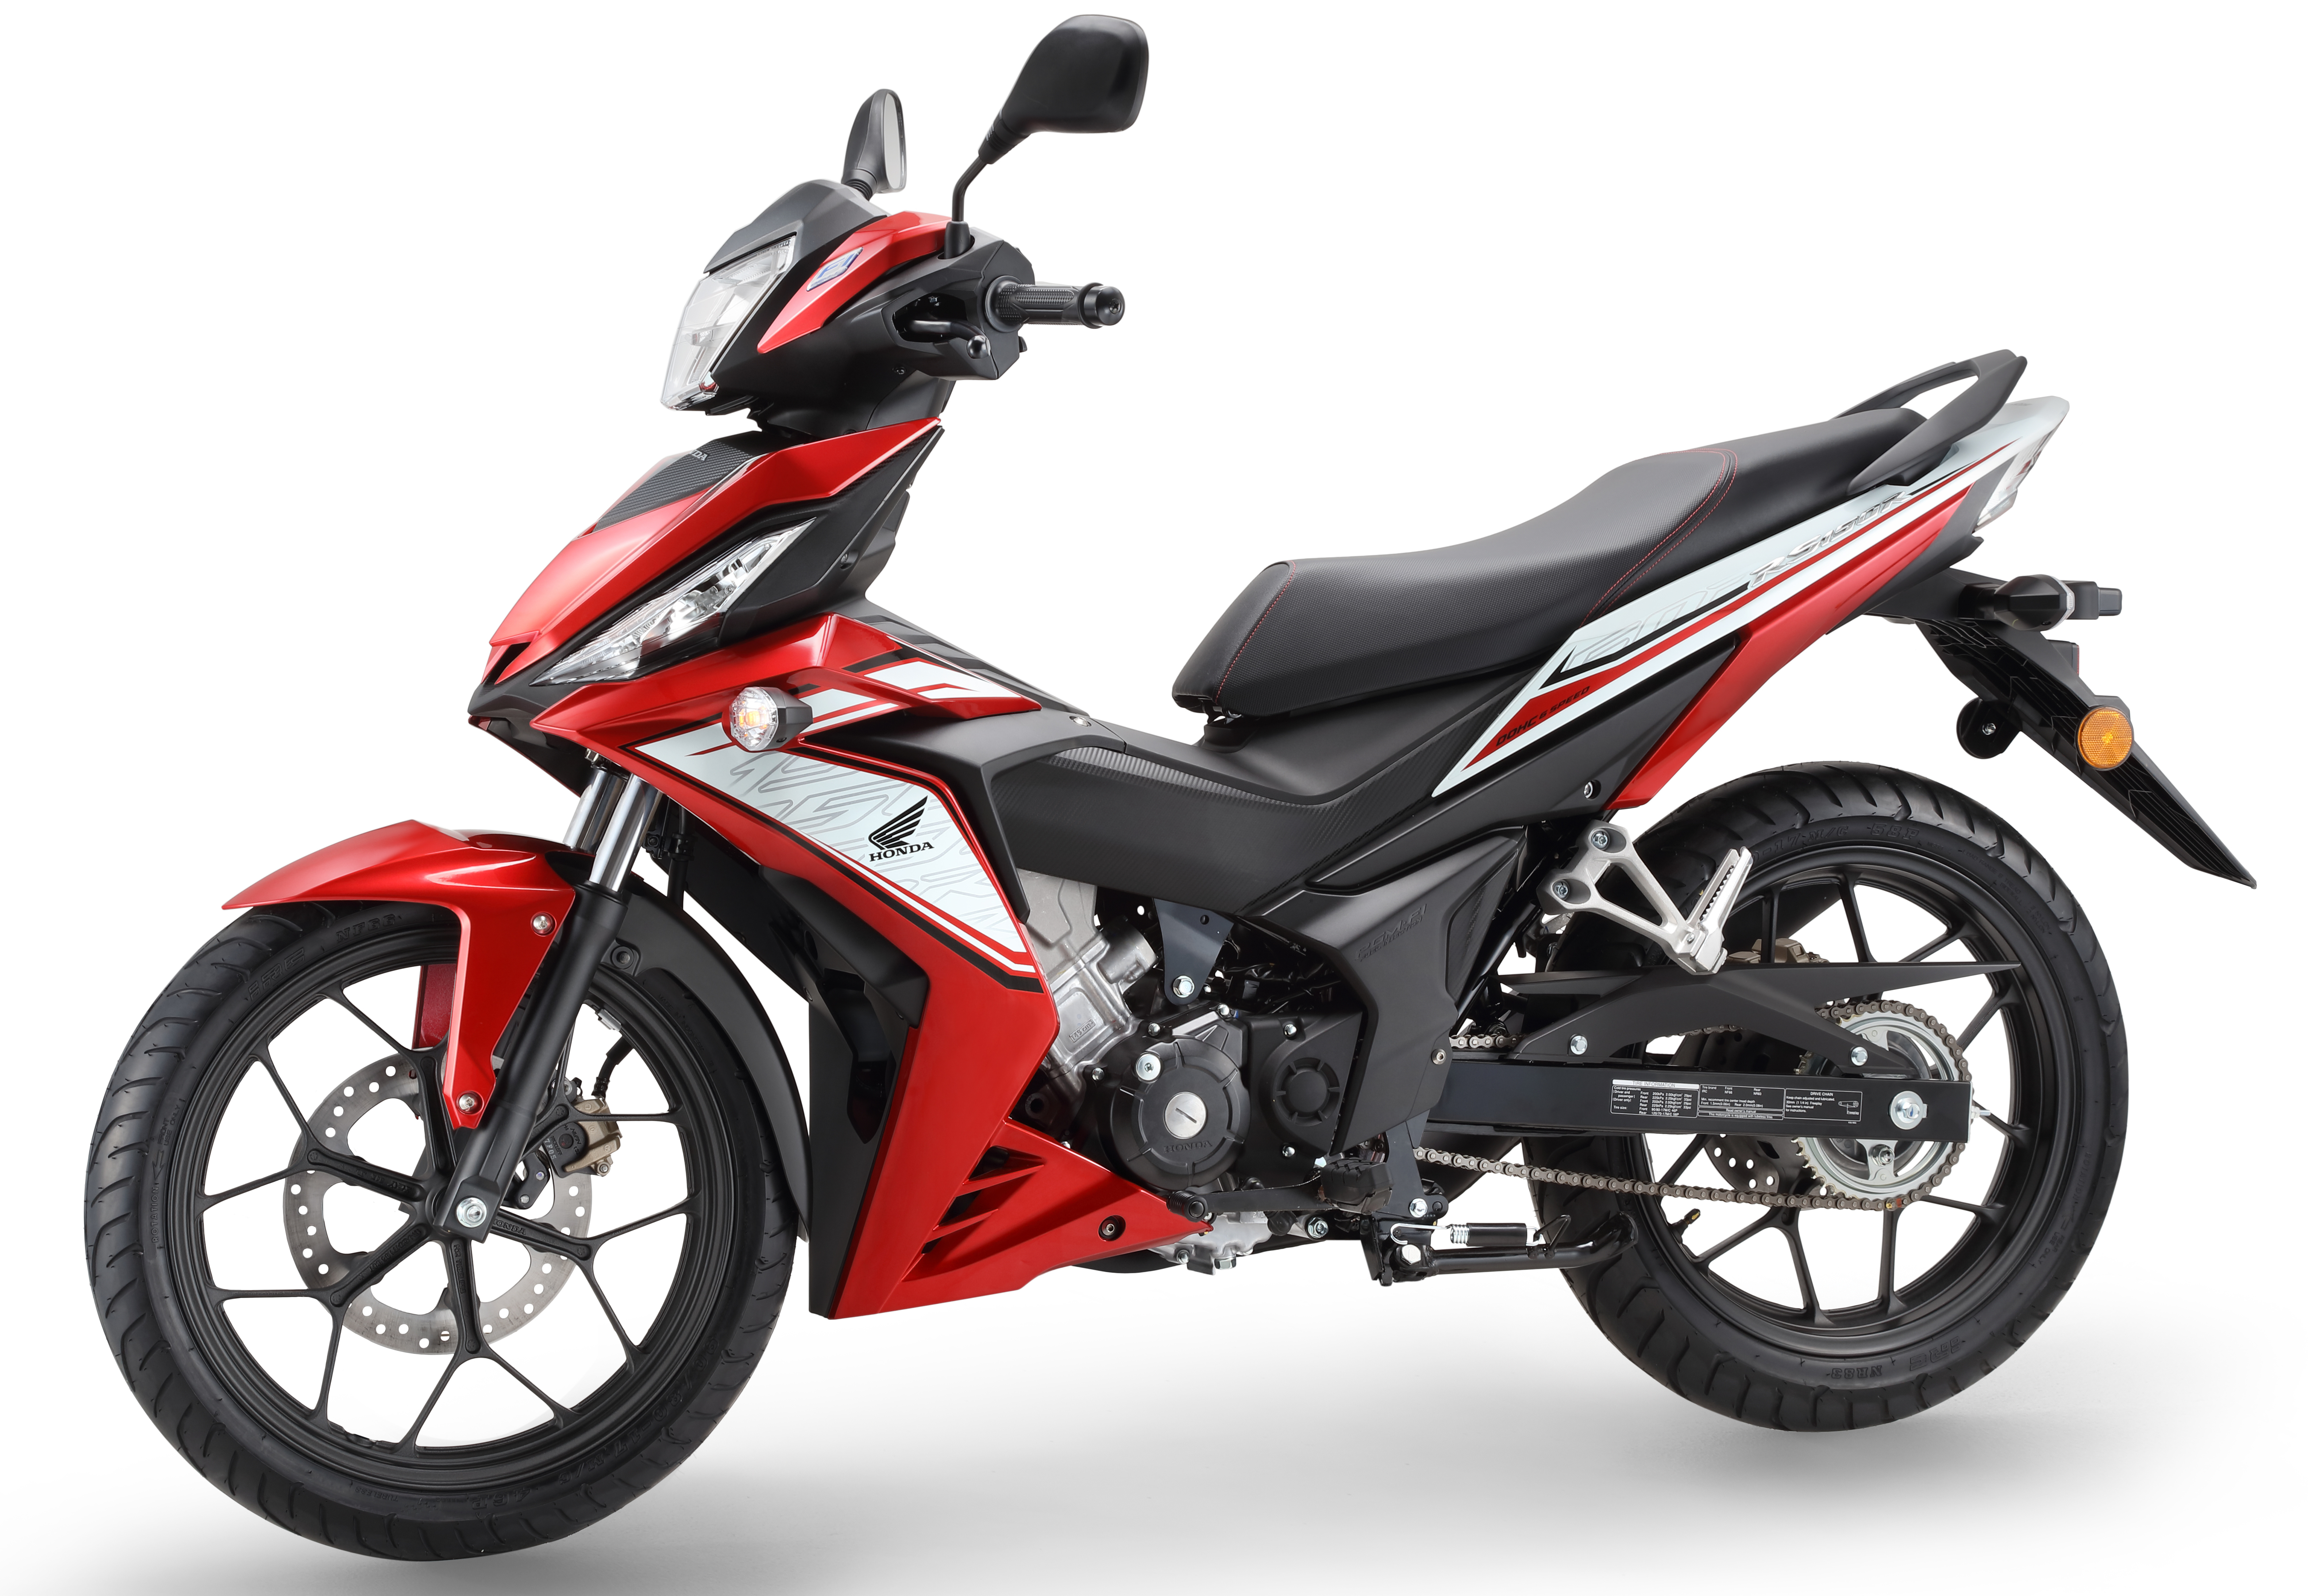 2017 Honda RS150R In New Colours From RM8478